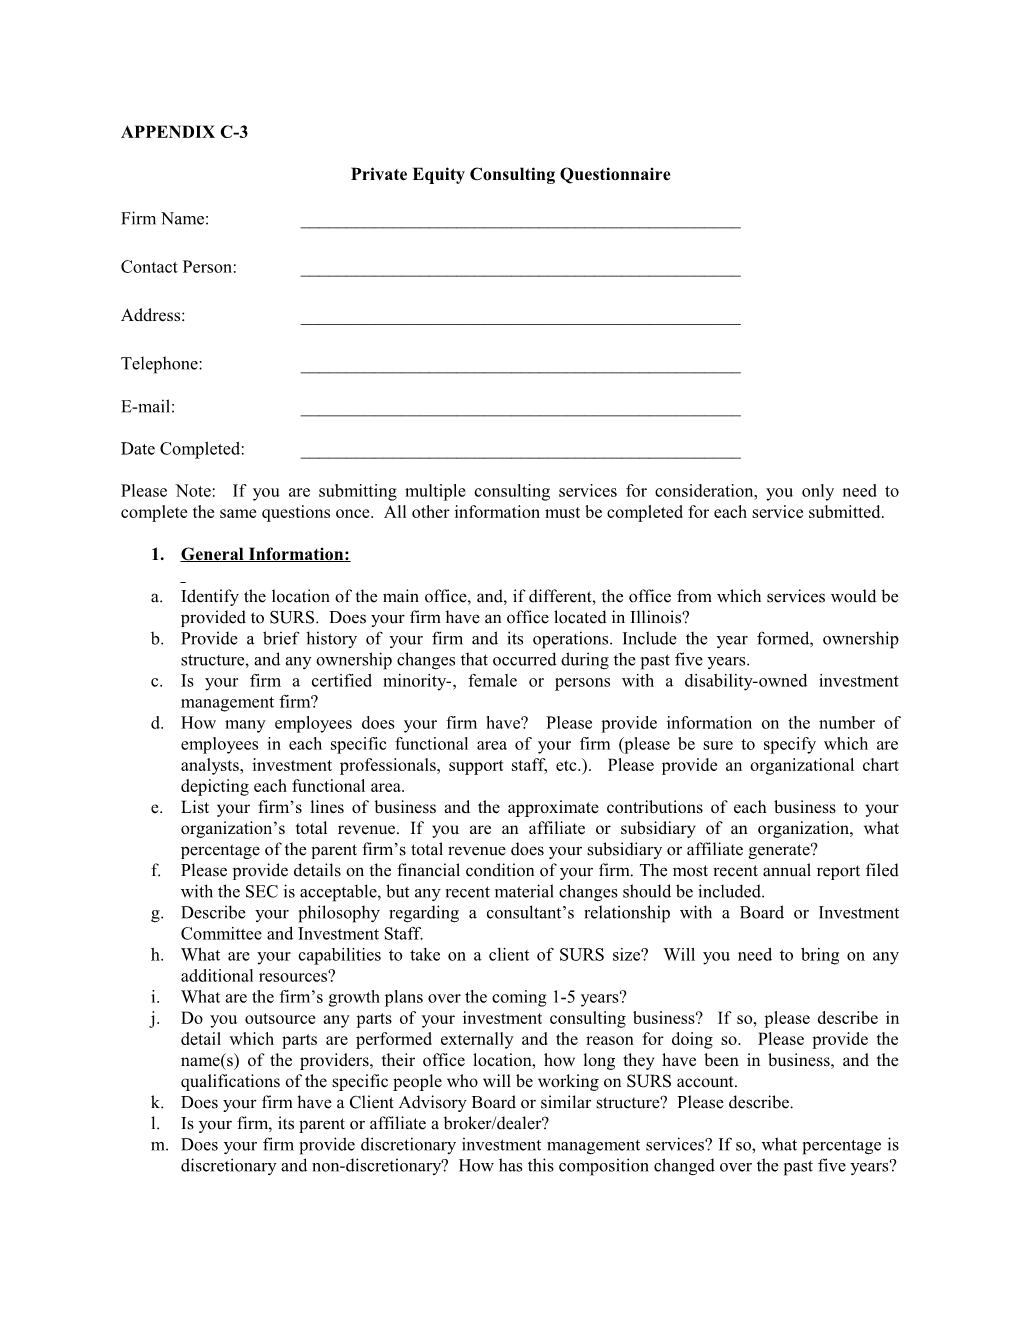 Private Equity Consulting Questionnaire